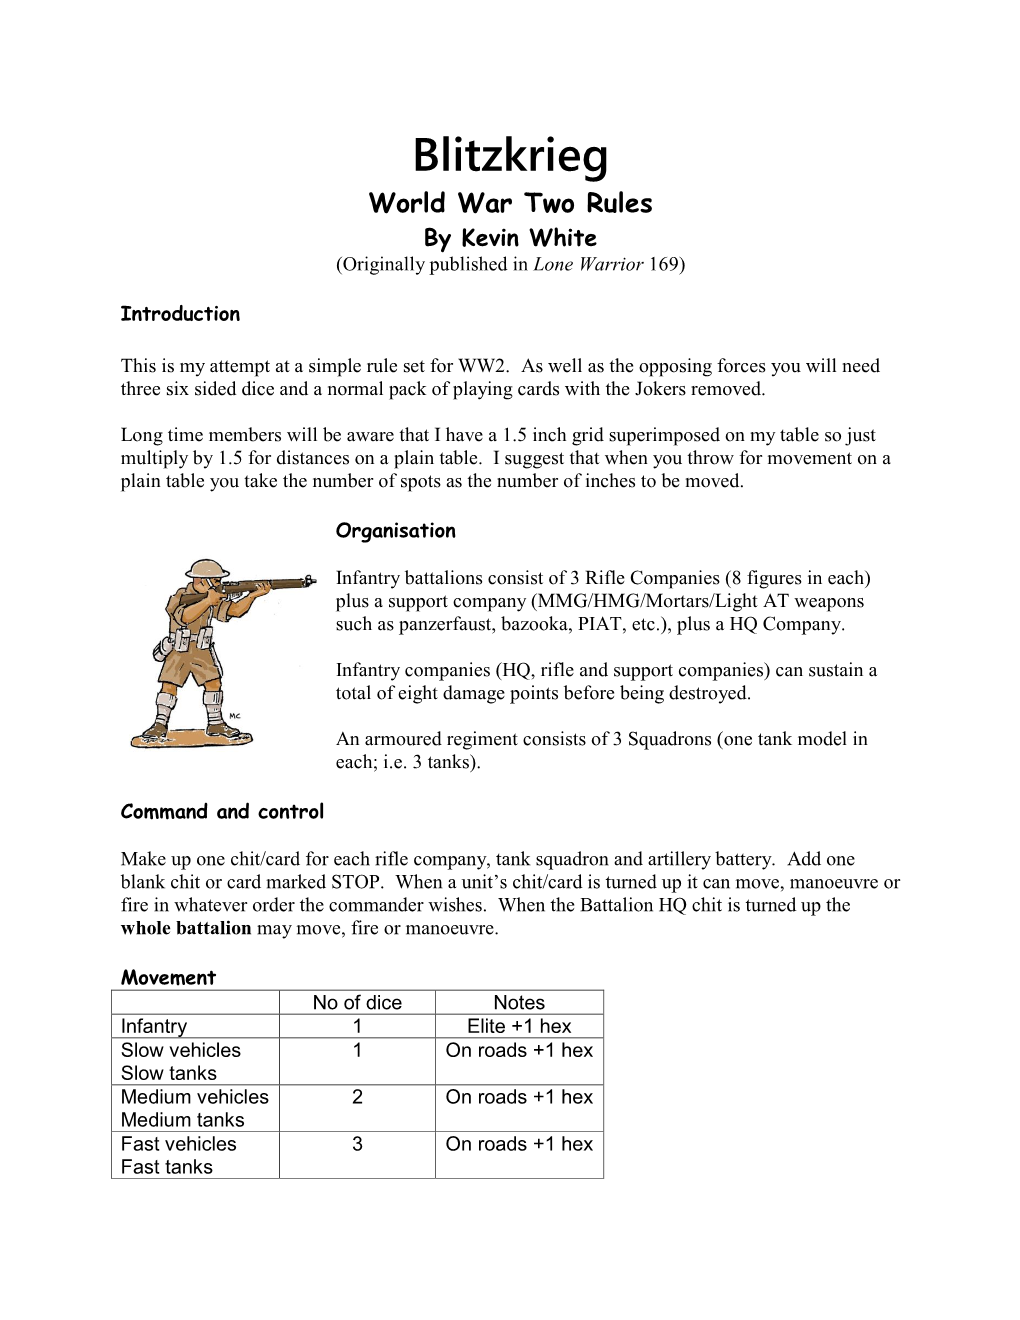 Blitzkrieg World War Two Rules by Kevin White (Originally Published in Lone Warrior 169)